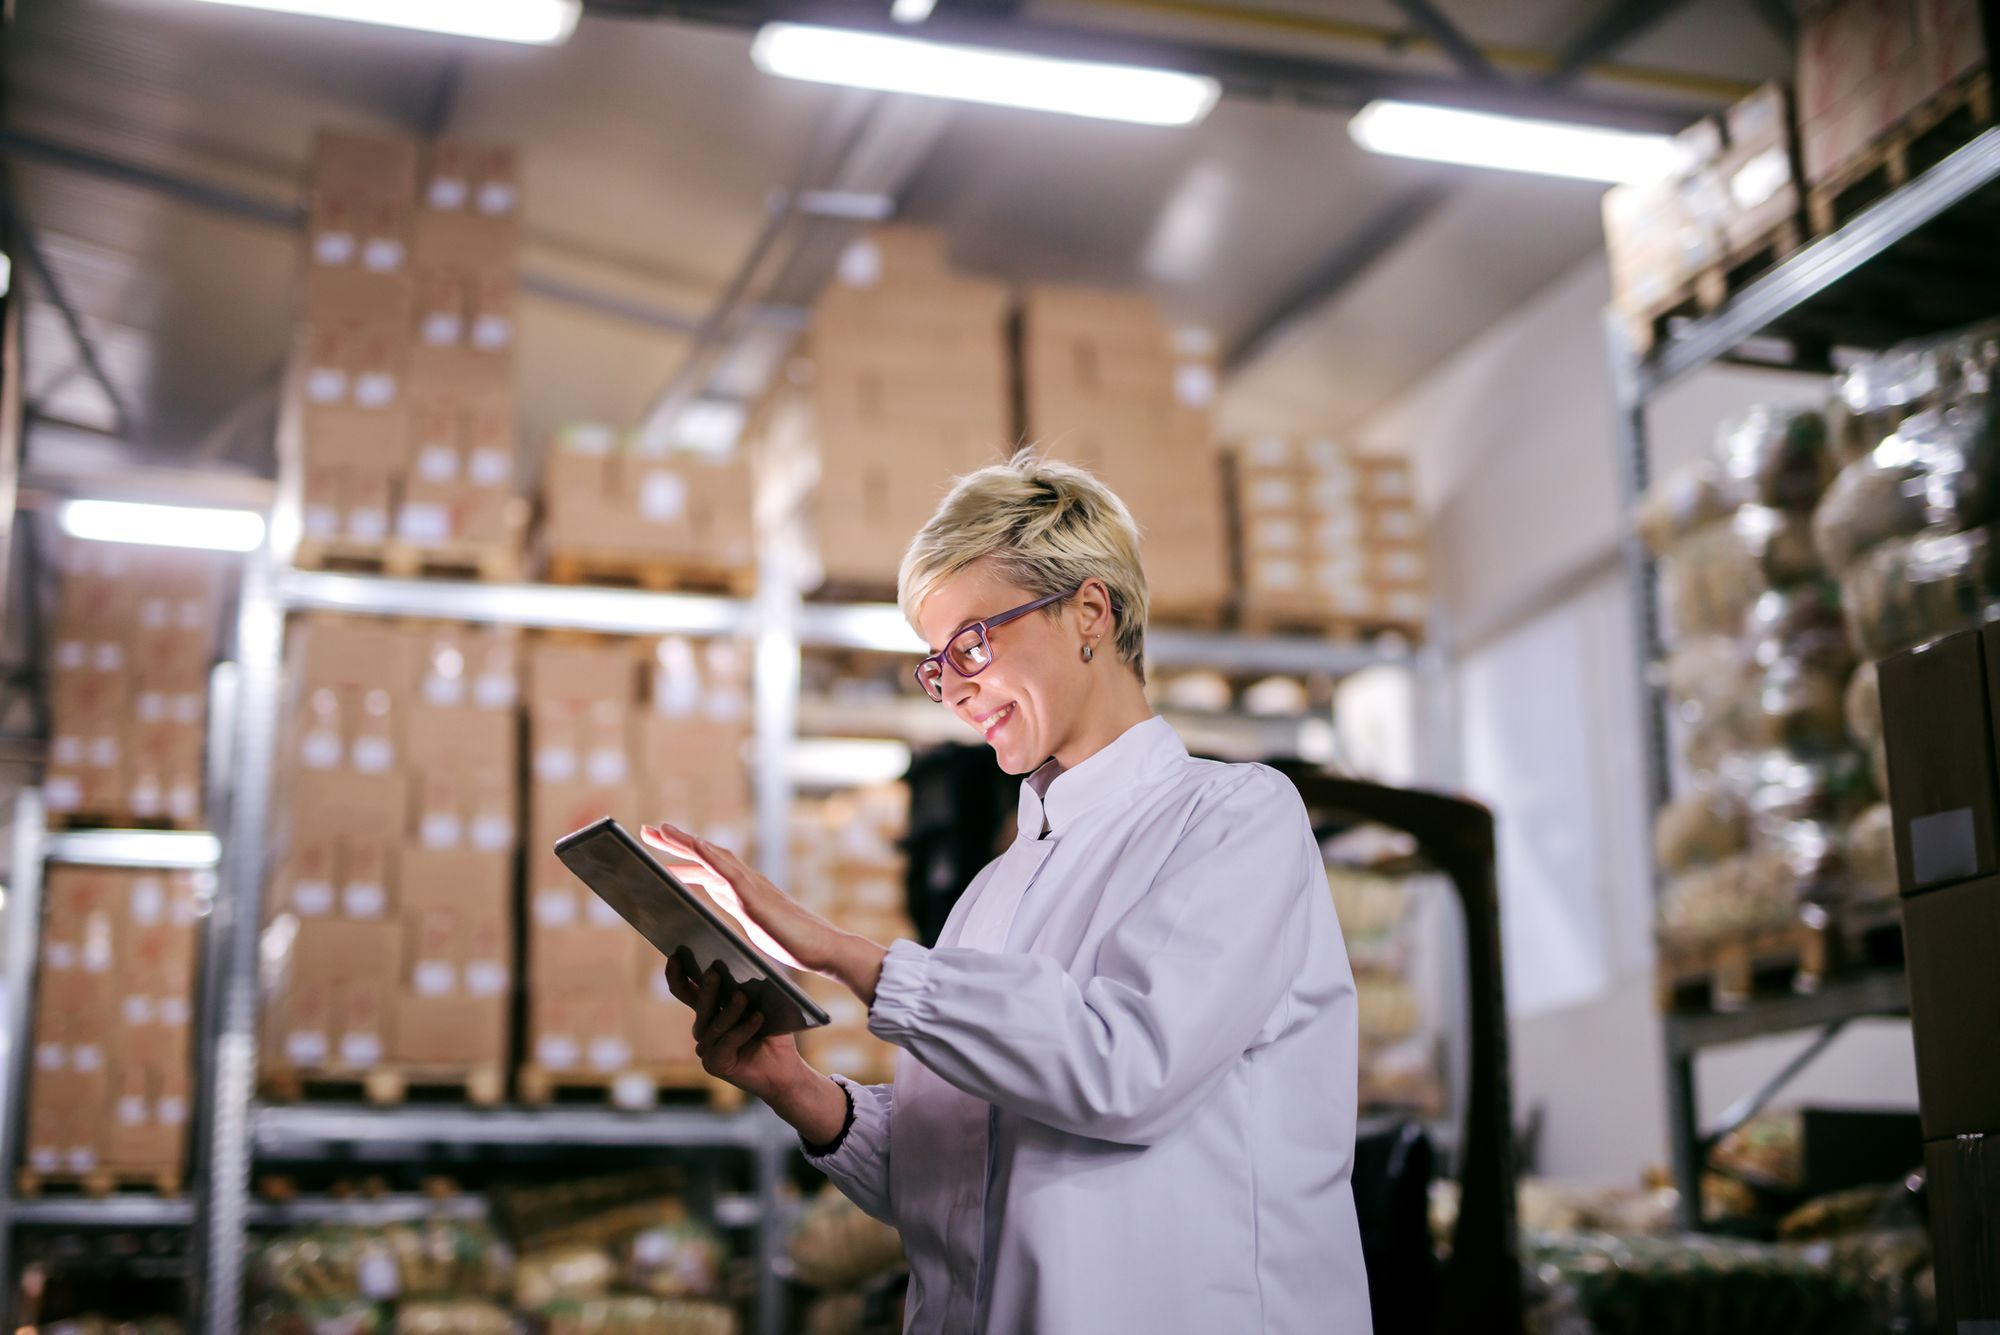 Inventory management app can optimize teamwork in warehouses